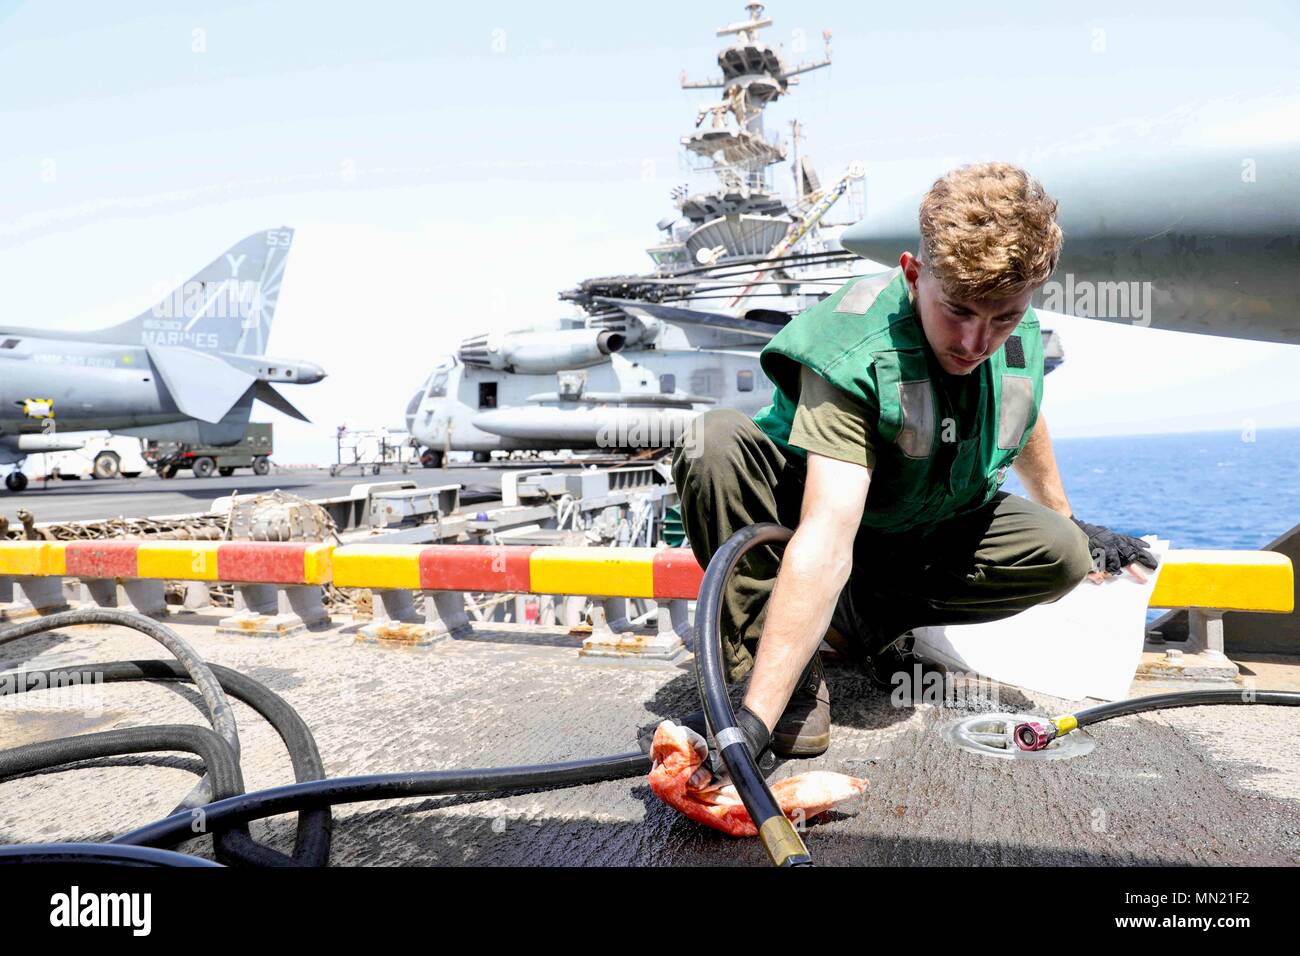 170813-N-UM082-0038 U.S. 5TH FLEET AREA OF OPERATIONS (August 13, 2017) Cpl. Jonathan Lambert, attached to the 24th Marine Expeditionary Unit, cleans excess hydraulic fluid while performing routine maintenance on a AV-8B Harrier on the flight deck of the multipurpose amphibious assault ship USS Bataan (LHD 5). The ship and its ready group are deployed in the U.S. 5th Fleet area of operations in support of maritime security operations to reassure allies and partners, and preserve the freedom of navigation and the free flow of commerce in the region. (U.S. Navy photo by Mass Communication Specia Stock Photo